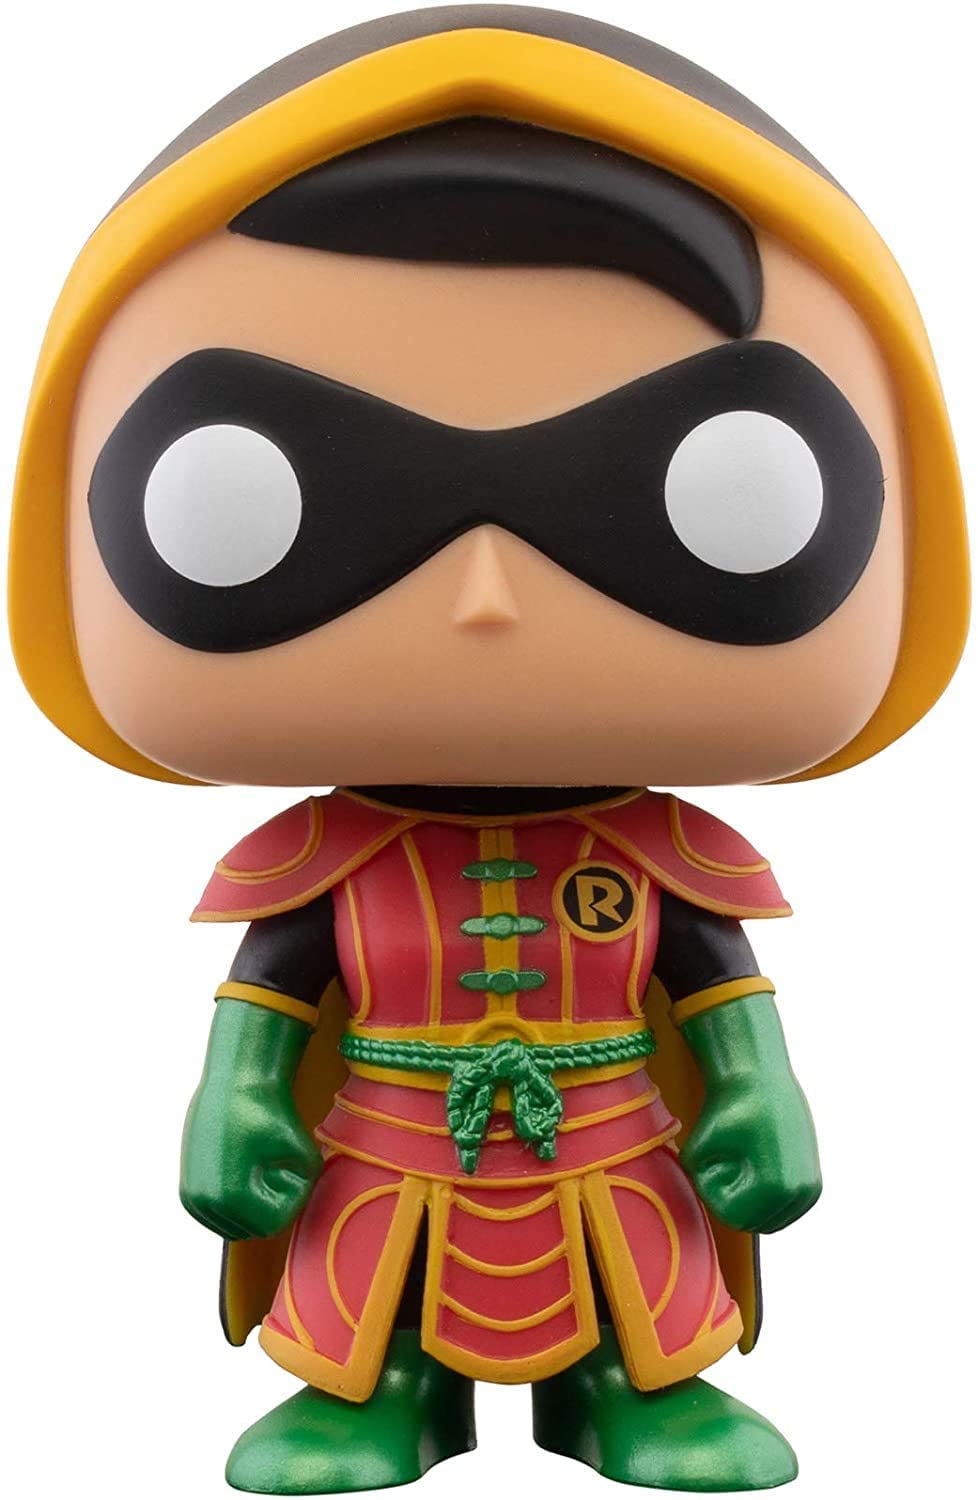 Funko Pop! Heroes: Imperial Palace - Robin Chase Vinyl Figure